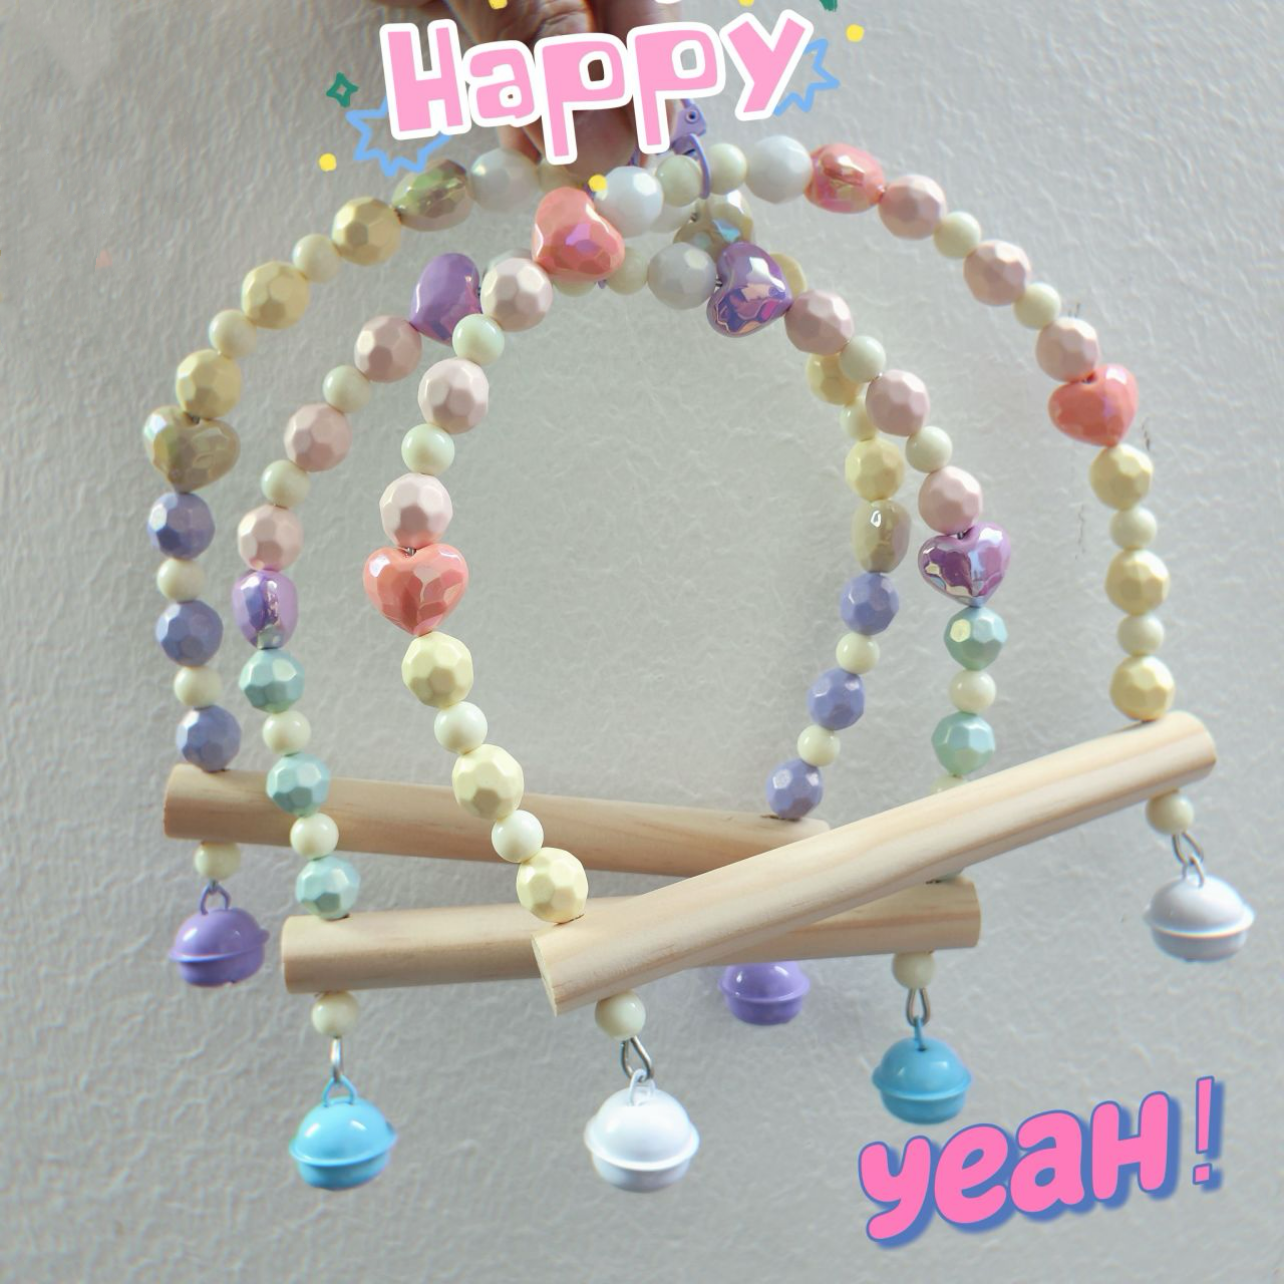 Handcrafted Beaded Semi-Circle Top Colorful Bird Swing & Perch with Hook - Birdcage Accessory for Pet Bird Entertainment Parakeet Budgie Cockatiel Finch Lovebird Monk Parakeet Dove Parrotlet Sparrow